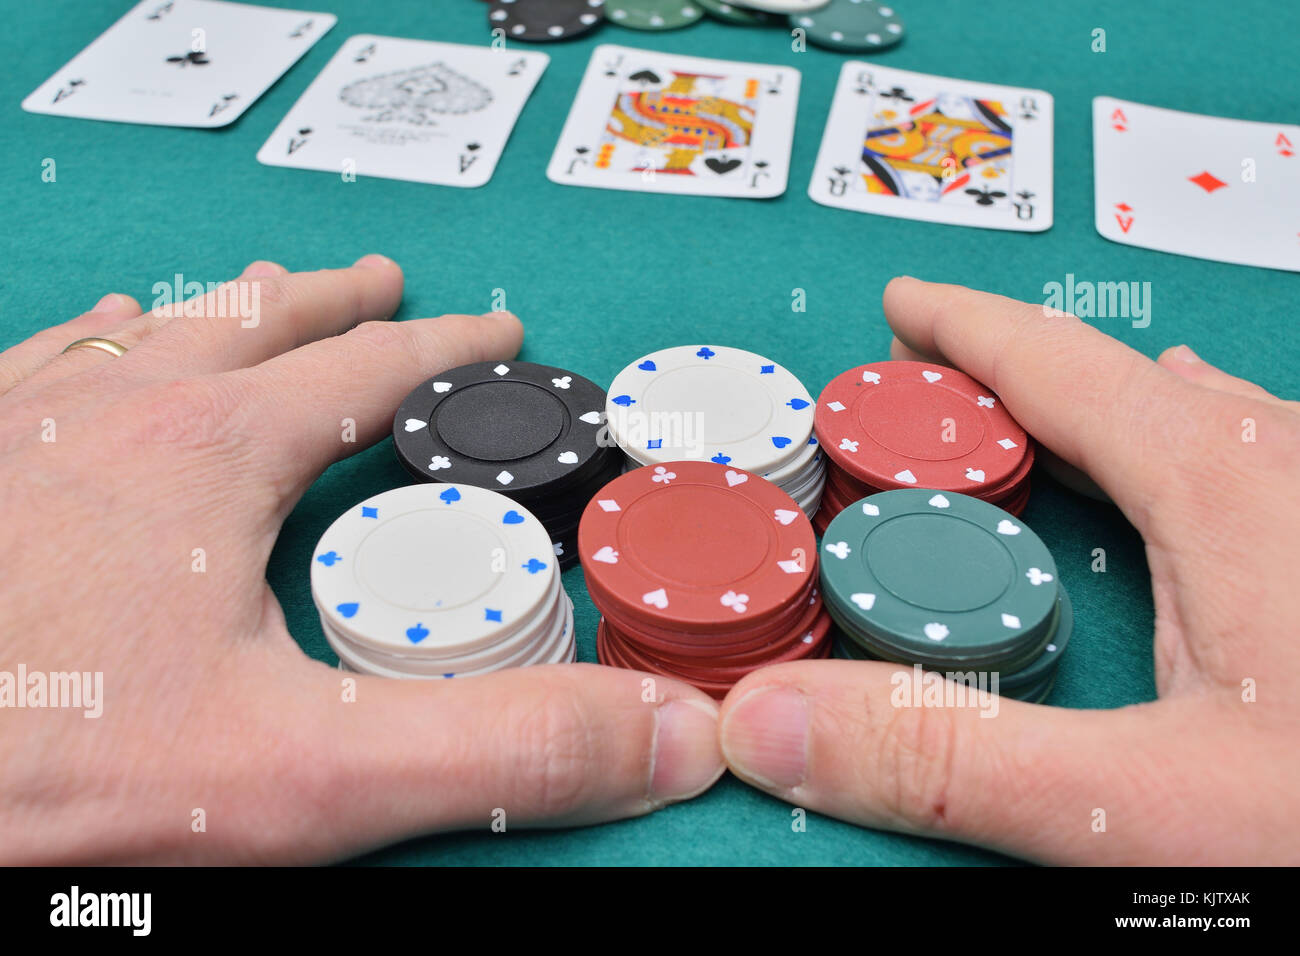 Stack of poker chips in two hands and cards on a gambling table with chips Stock Photo